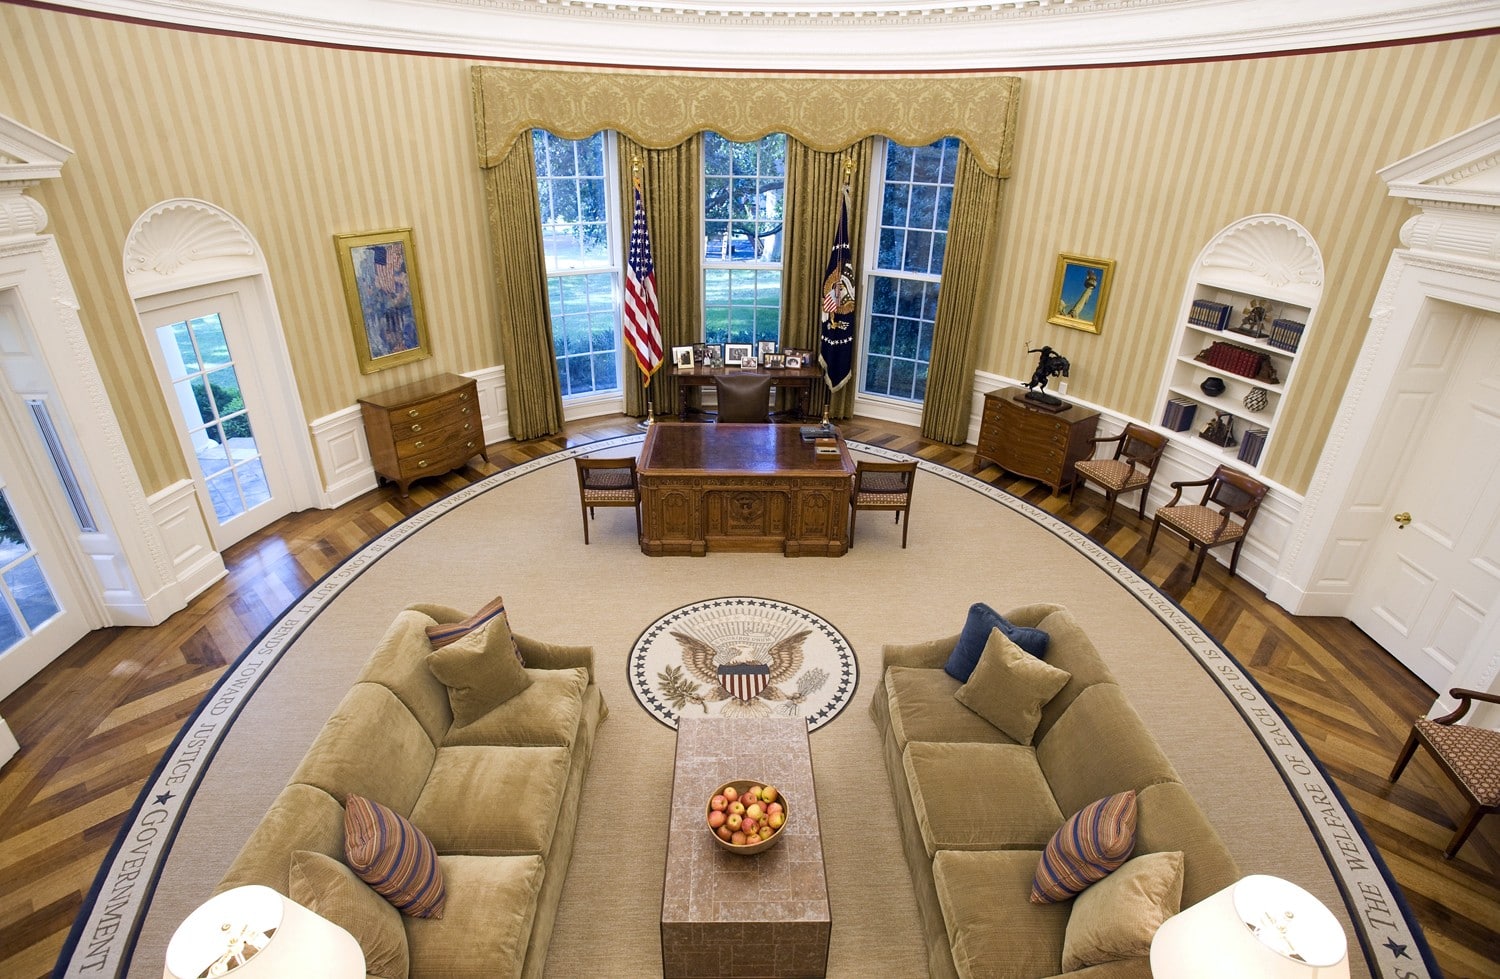 I’ll Be Impressed If You Score 11/15 on This General Knowledge Quiz (feat. JFK) White House Oval Office